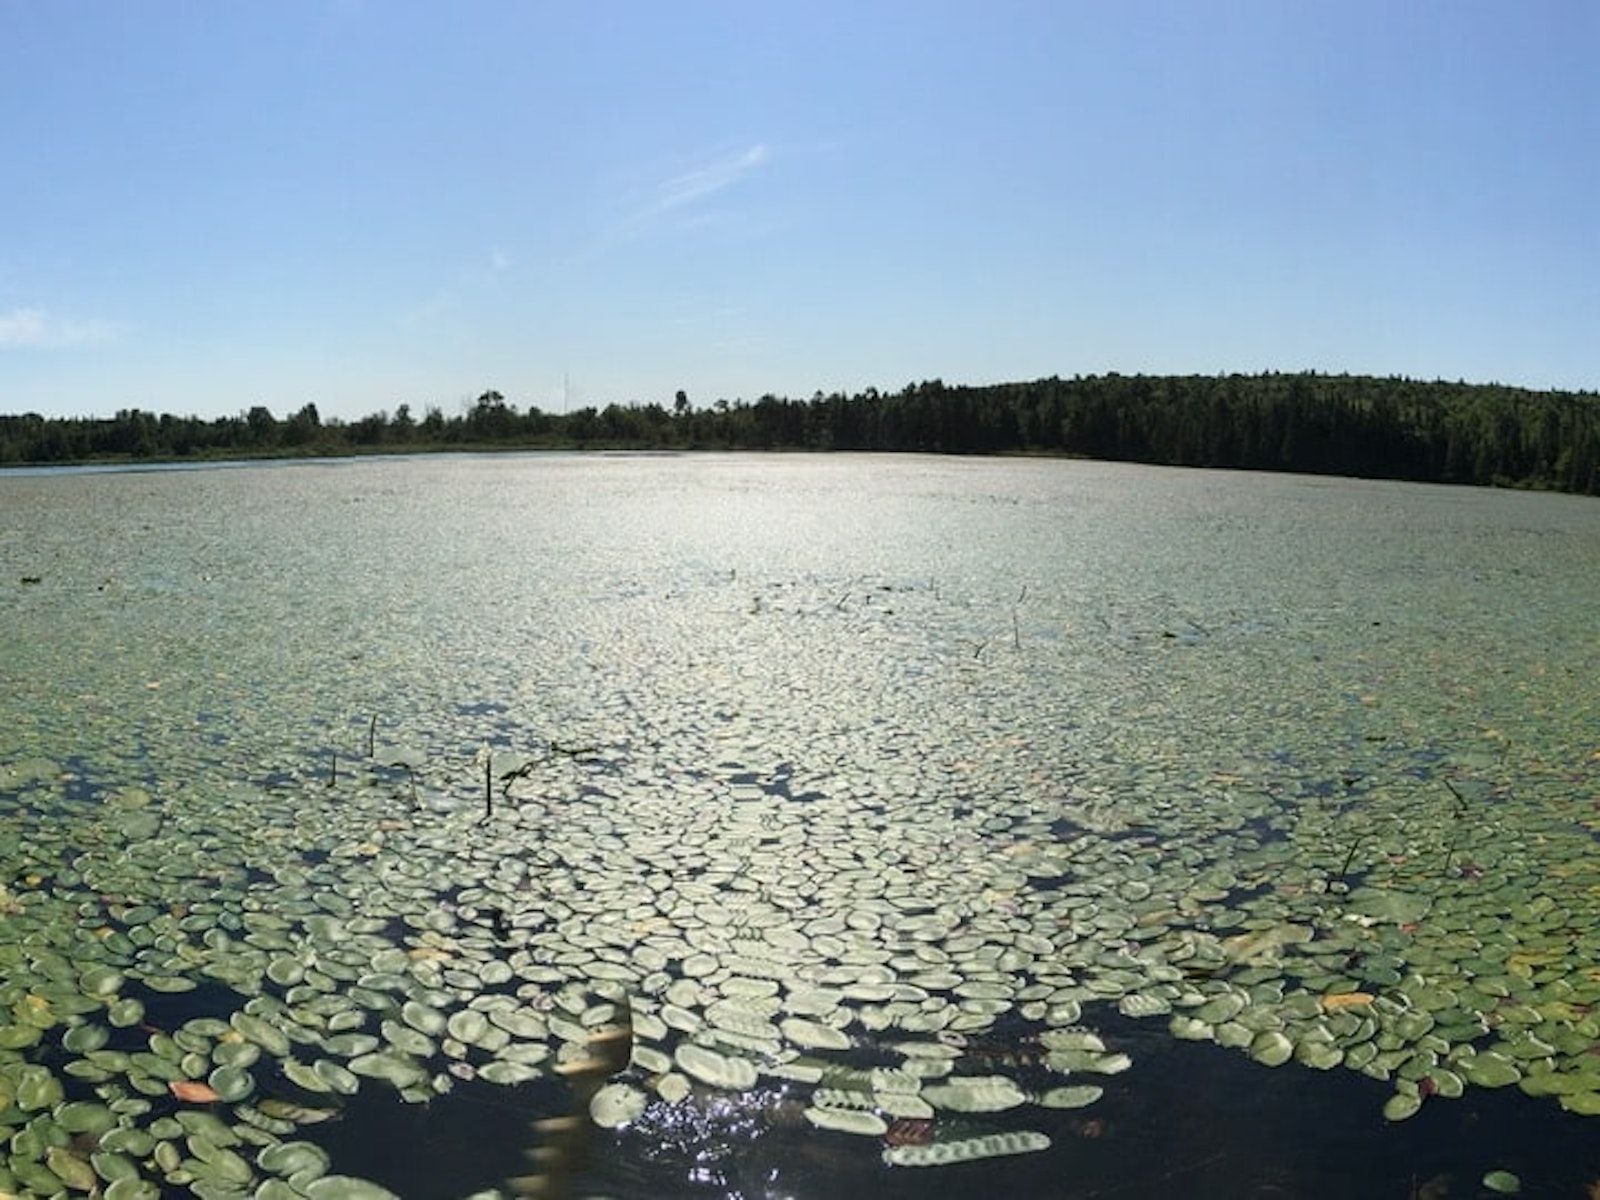 Lake with lily pads --- 
Lac aux nénuphars